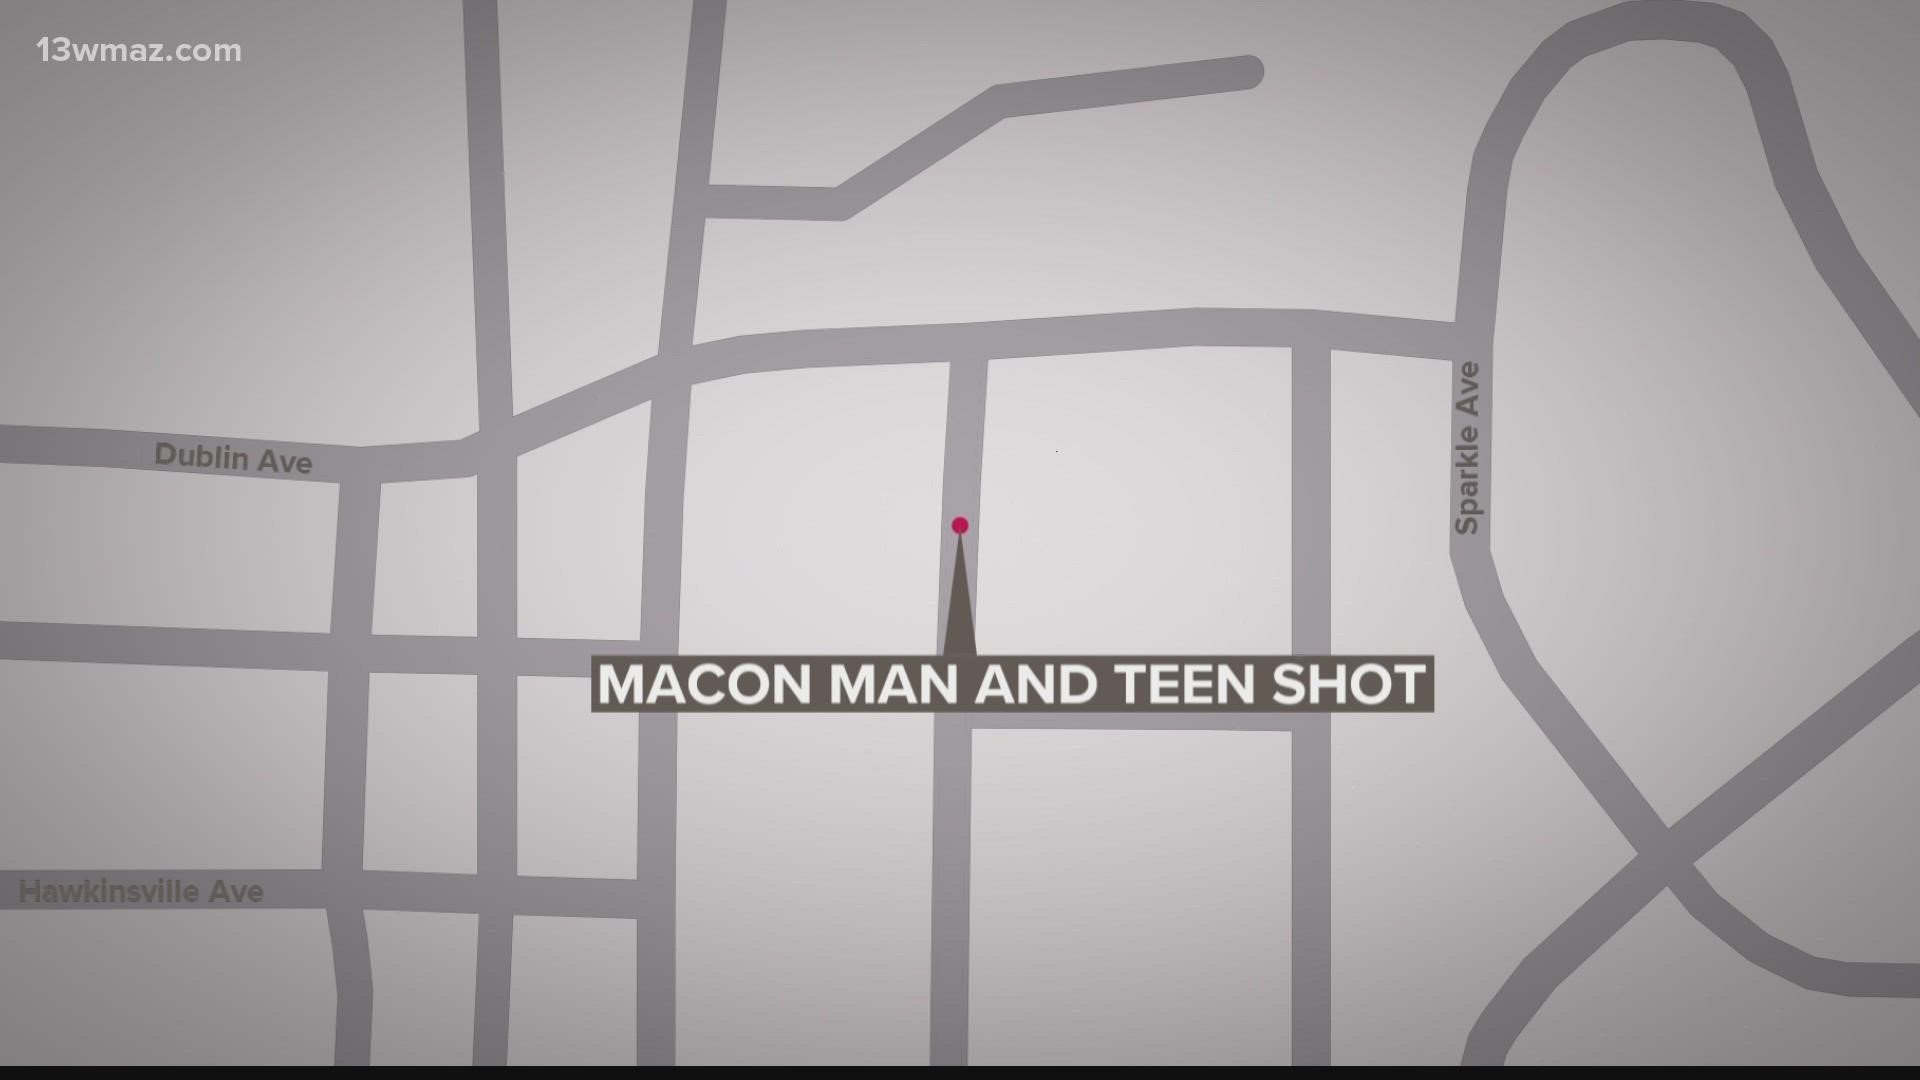 Just after 10 p.m., a 40-year-old man and a 14-year-old were shot during a fight that happened near the intersection.